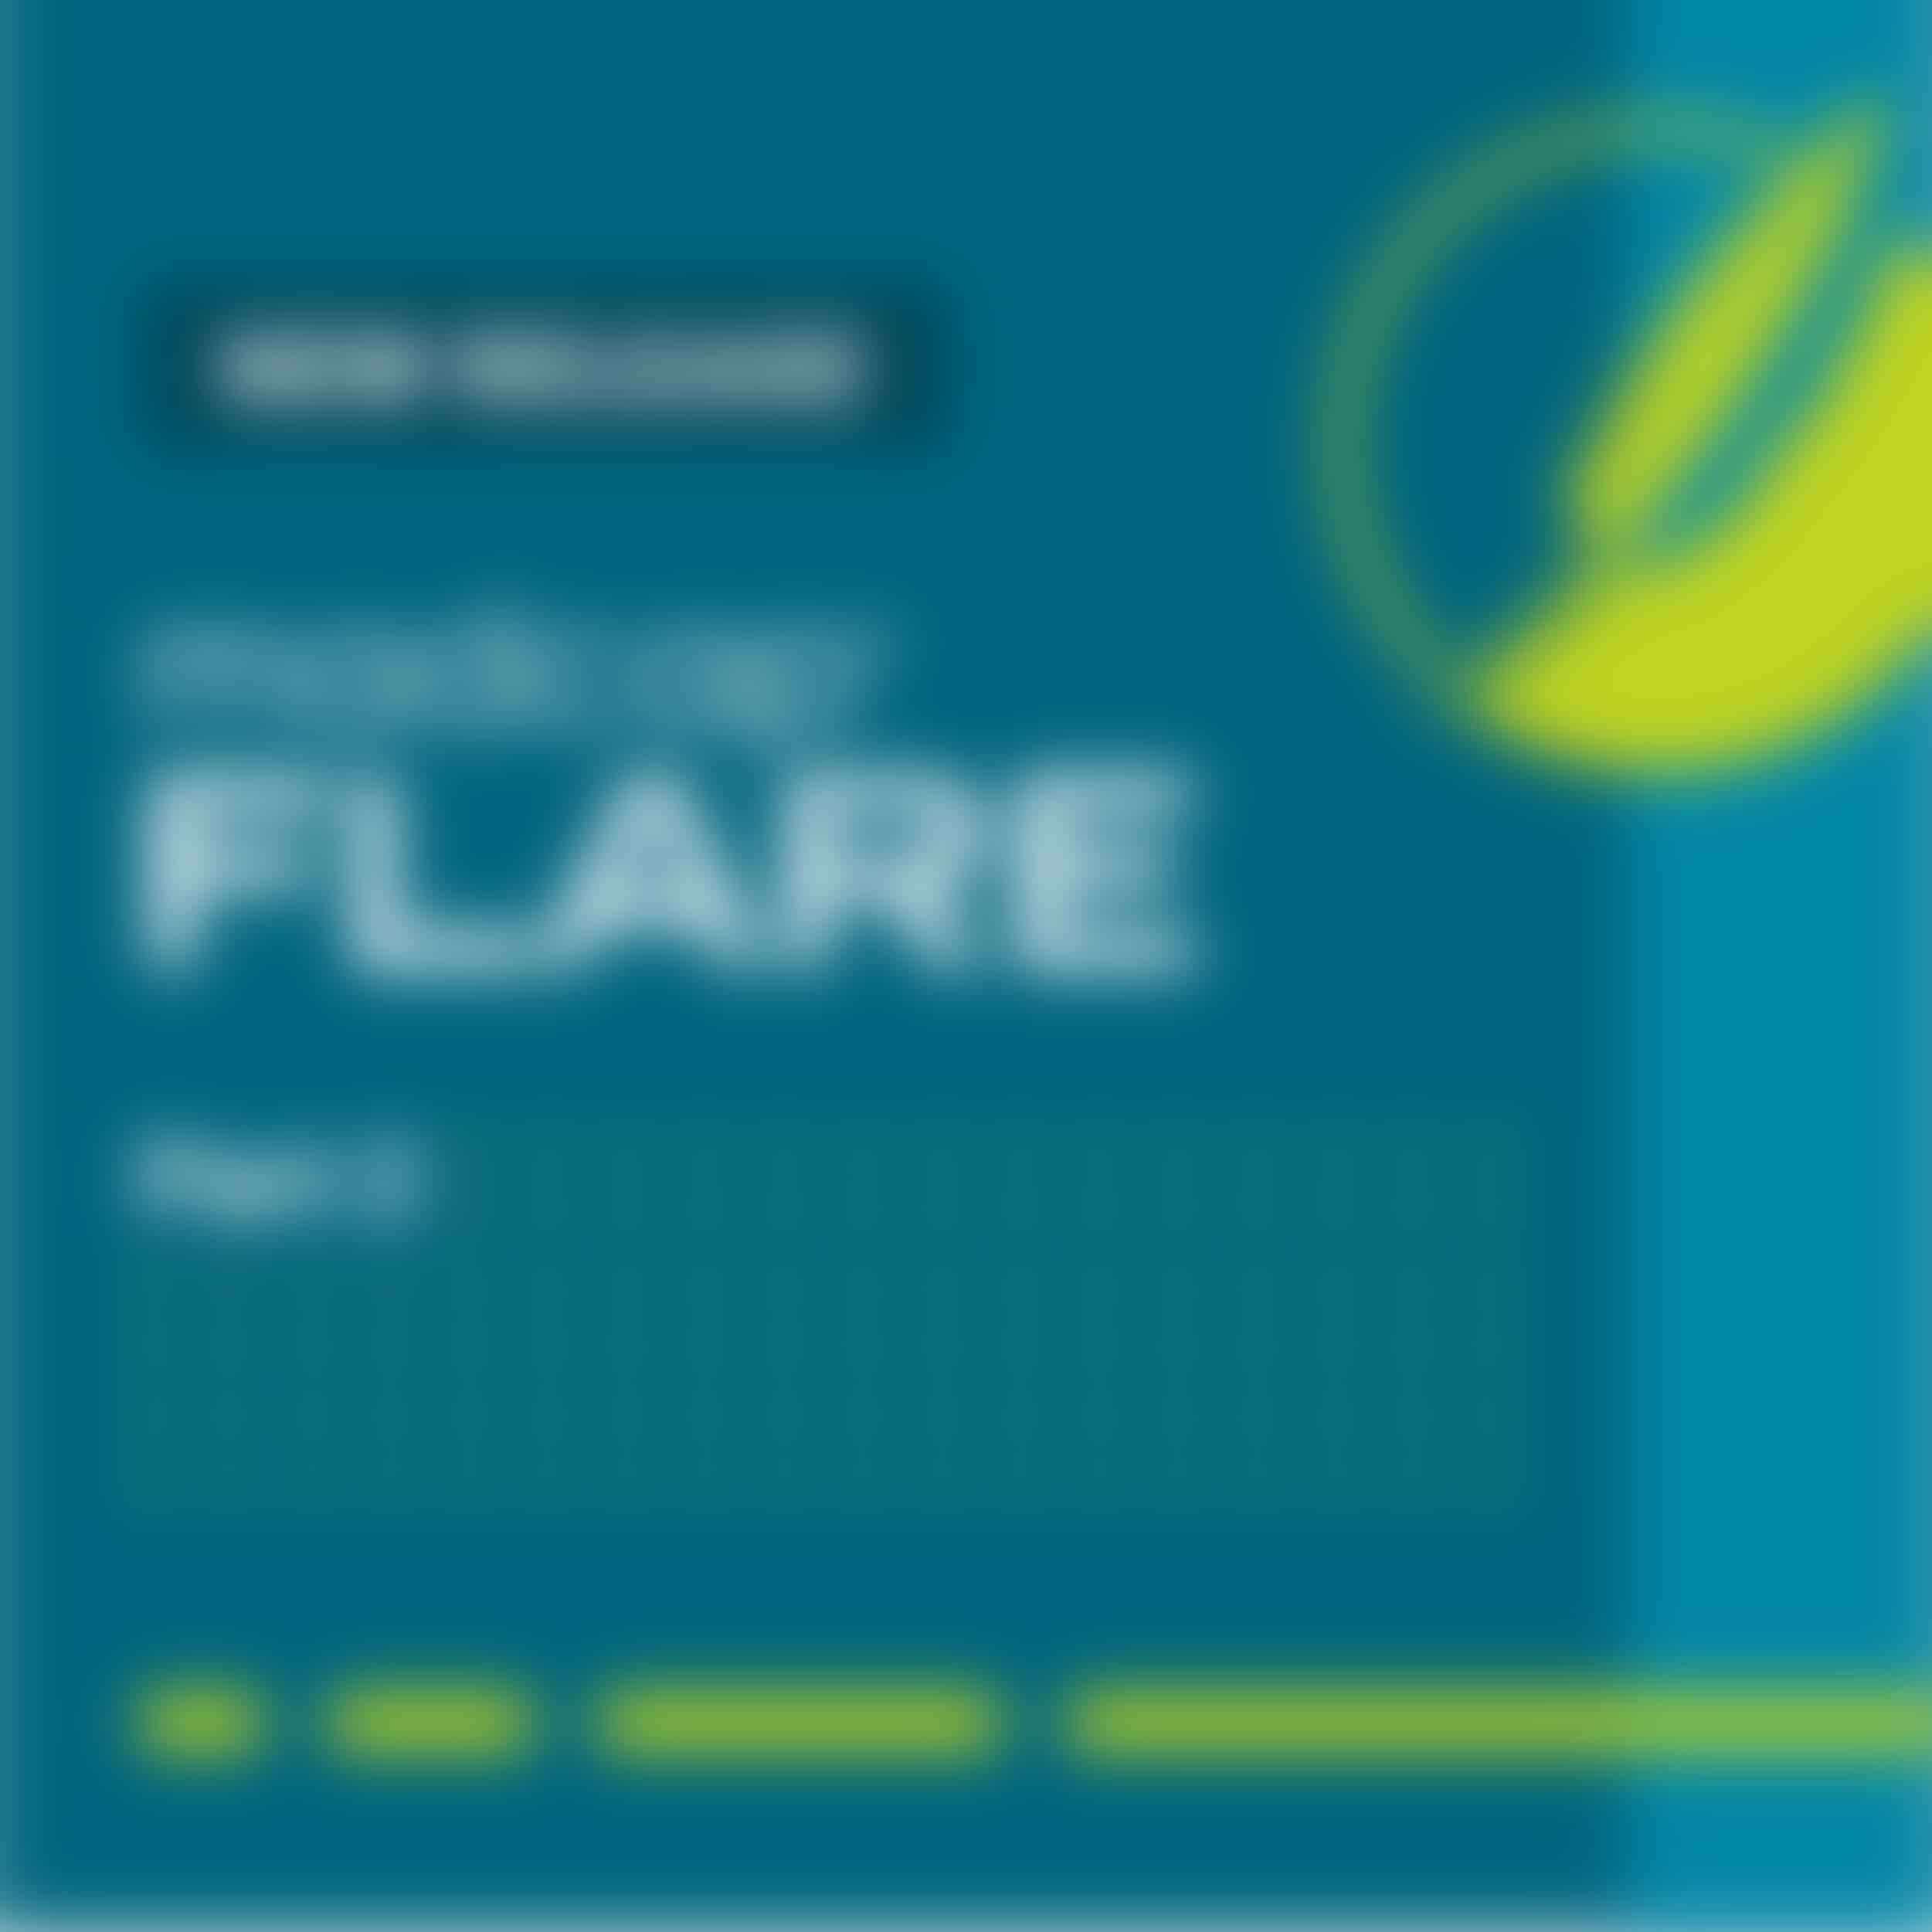 New Release: MadCap Flare 2020 r2 Adds Micro Content Authoring Enhancements, Styled Variables and More, Part 2